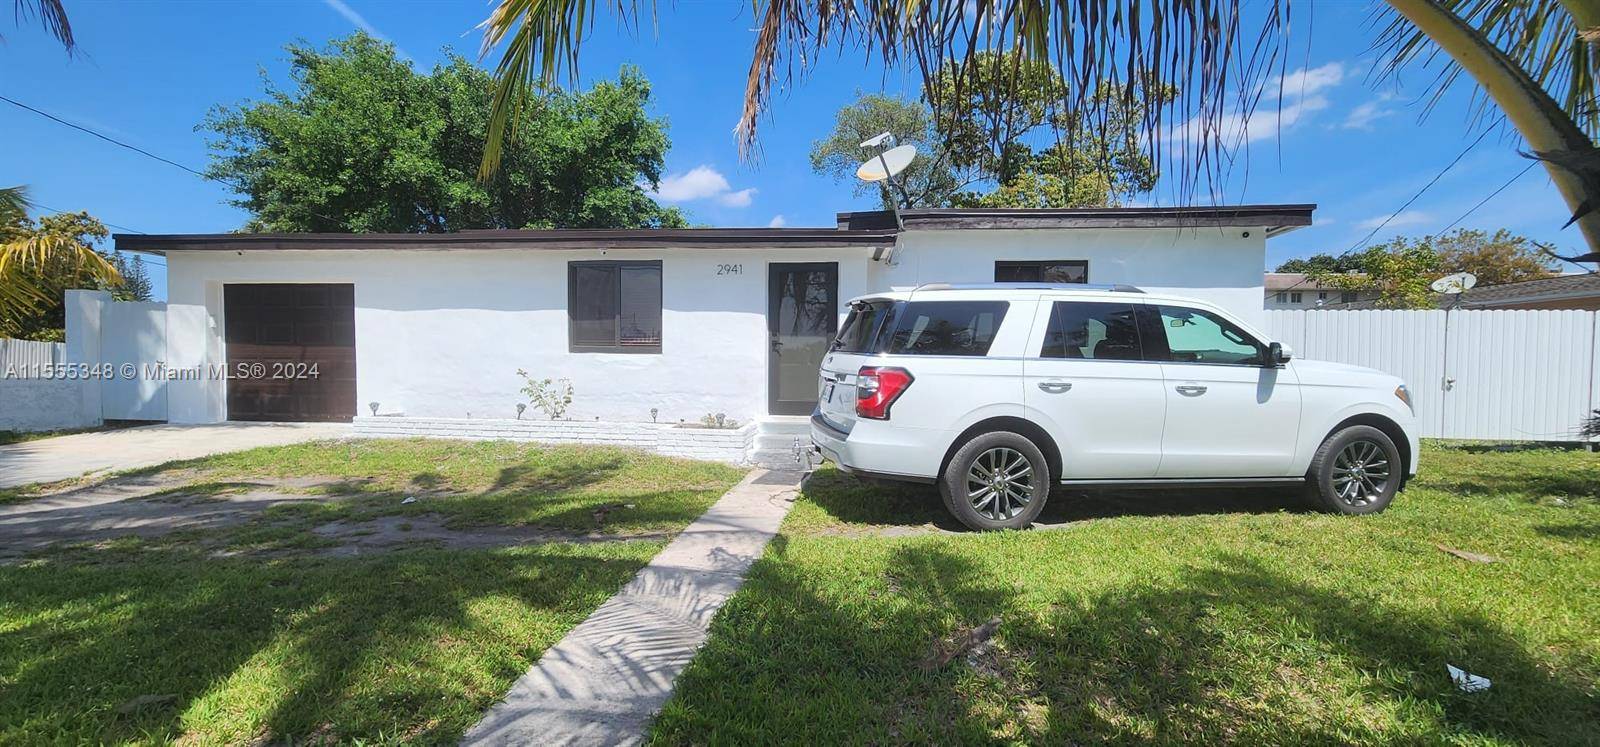 PROPERTY LOT IS 12, 197 SQ FT, HAVE ACCESS TO HOUSE THROUGH BACK STREET WITH DOUBLE DOOR, ENOUGH SPACE FOR BOAT, TRUCK, RV AND MORE.